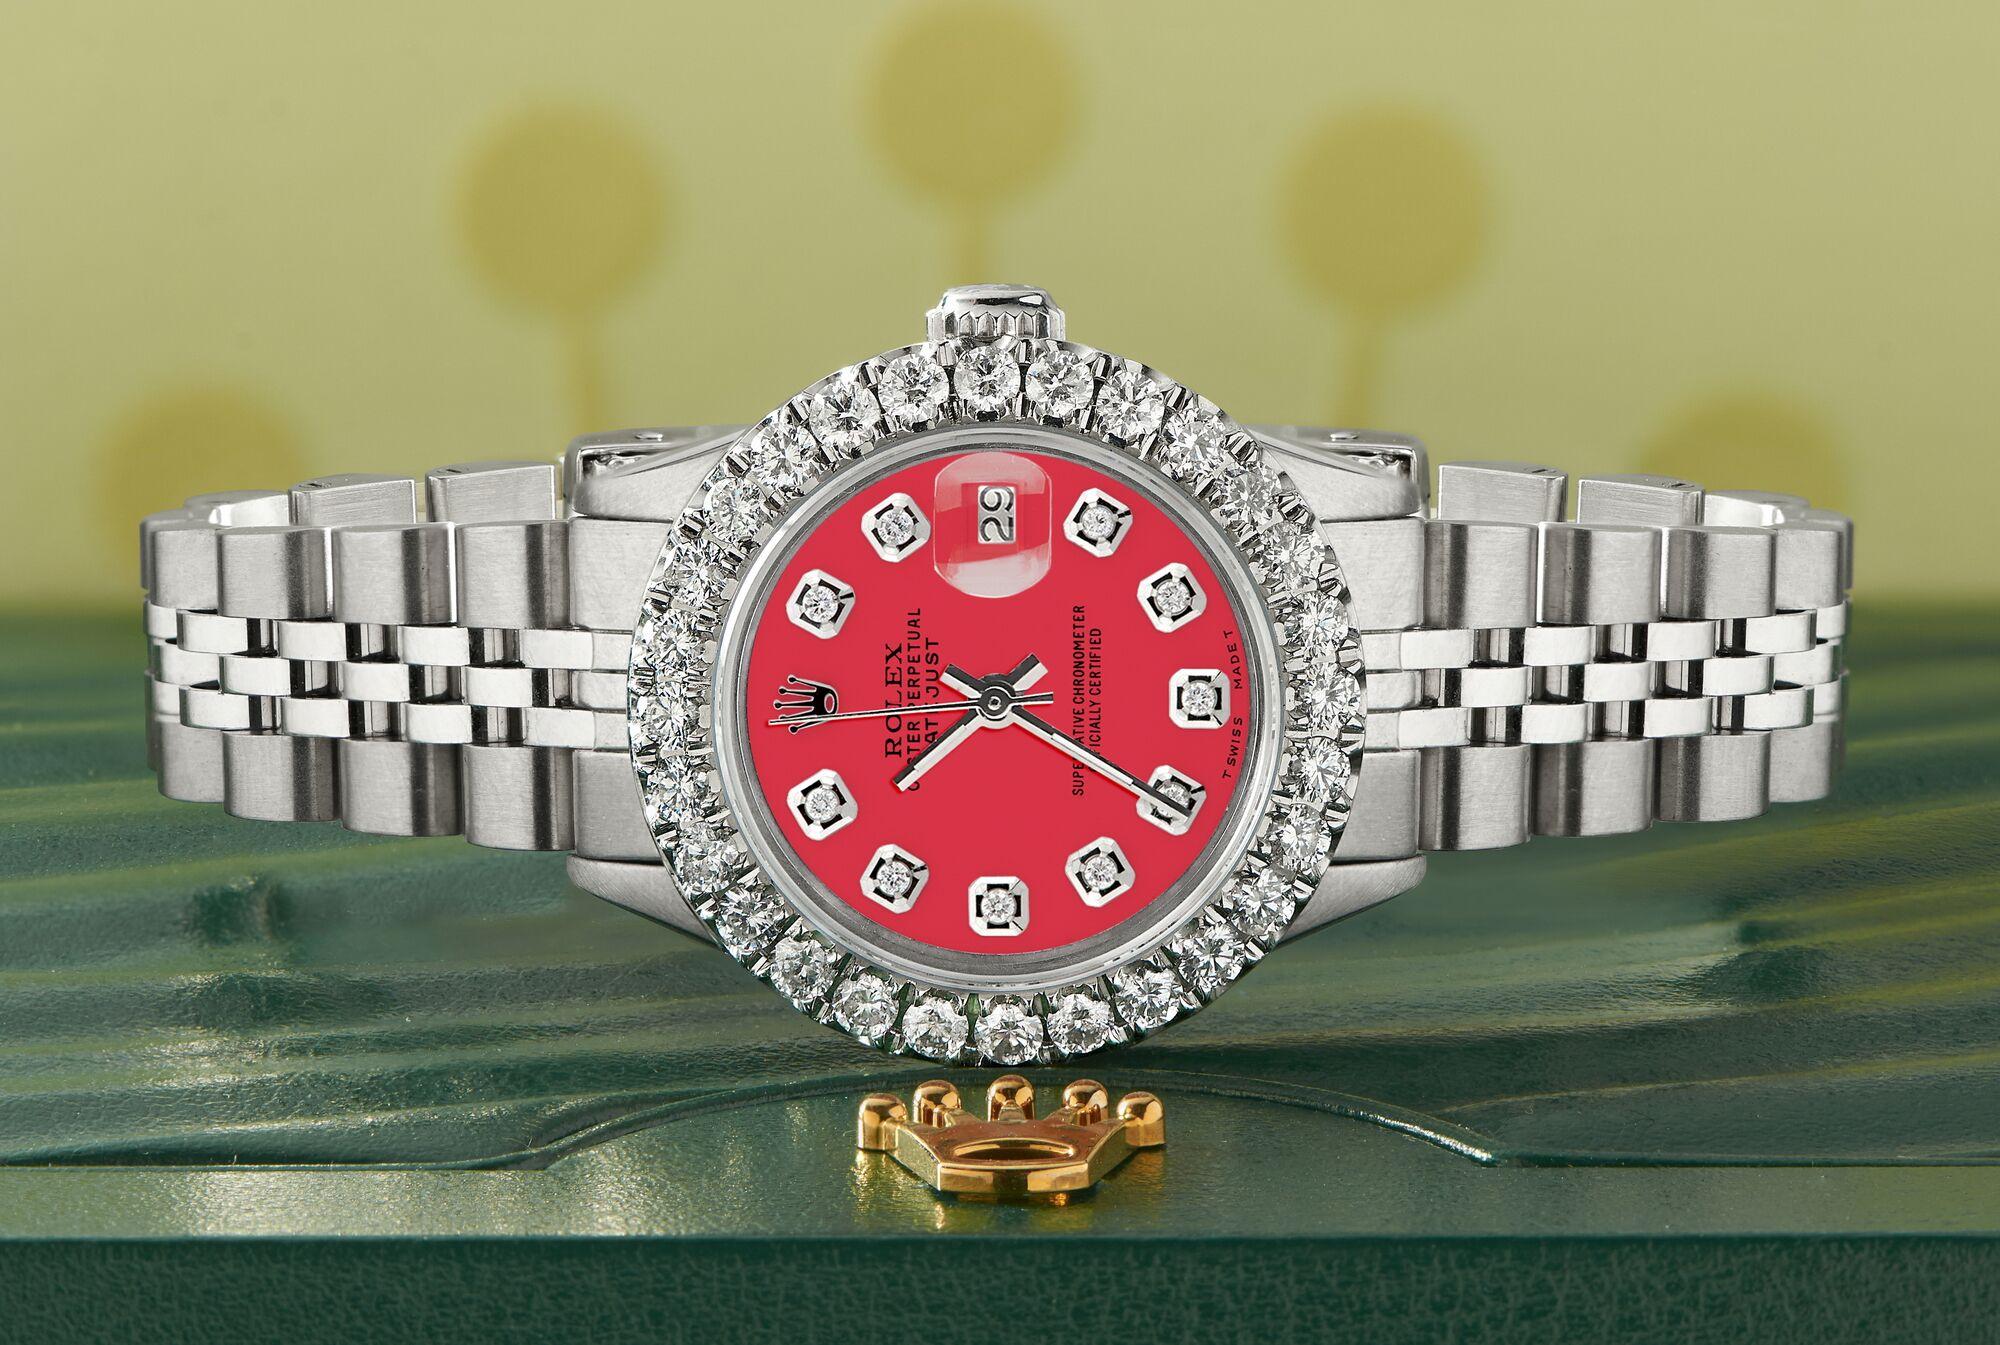 Rolex Datejust Steel Ladies Watch. Self-winding Rolex automatic movement. Stainless steel case 26mm in diameter. Custom 2.0ct diamond bezel. Screw-down crown. Scratch-resistant sapphire crystal. Custom scarlet red MOP diamond dial. Factory stainless